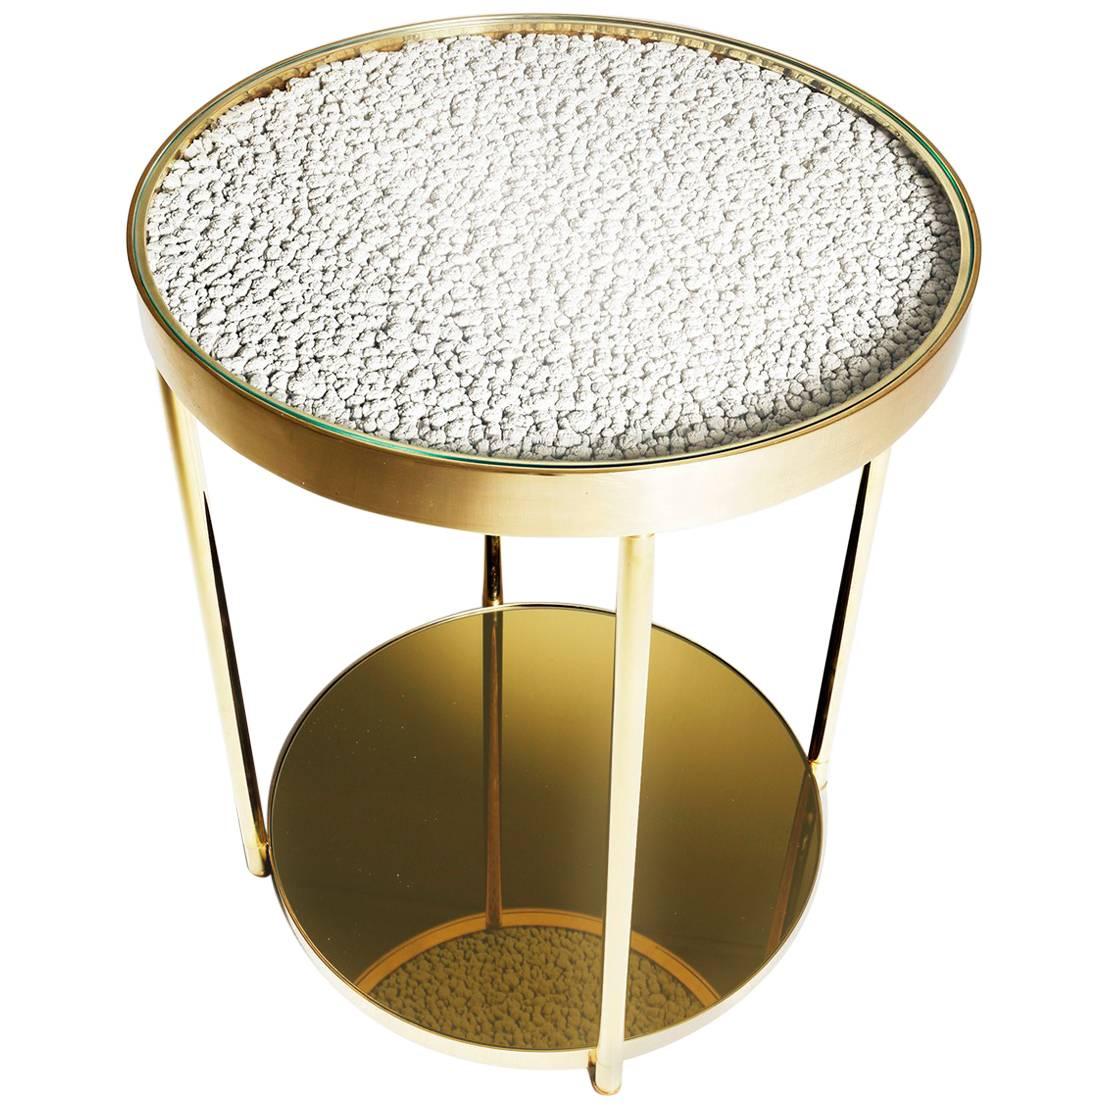 Contemporary Polished Brass Hemlock Side Table with Golden Mirror Base